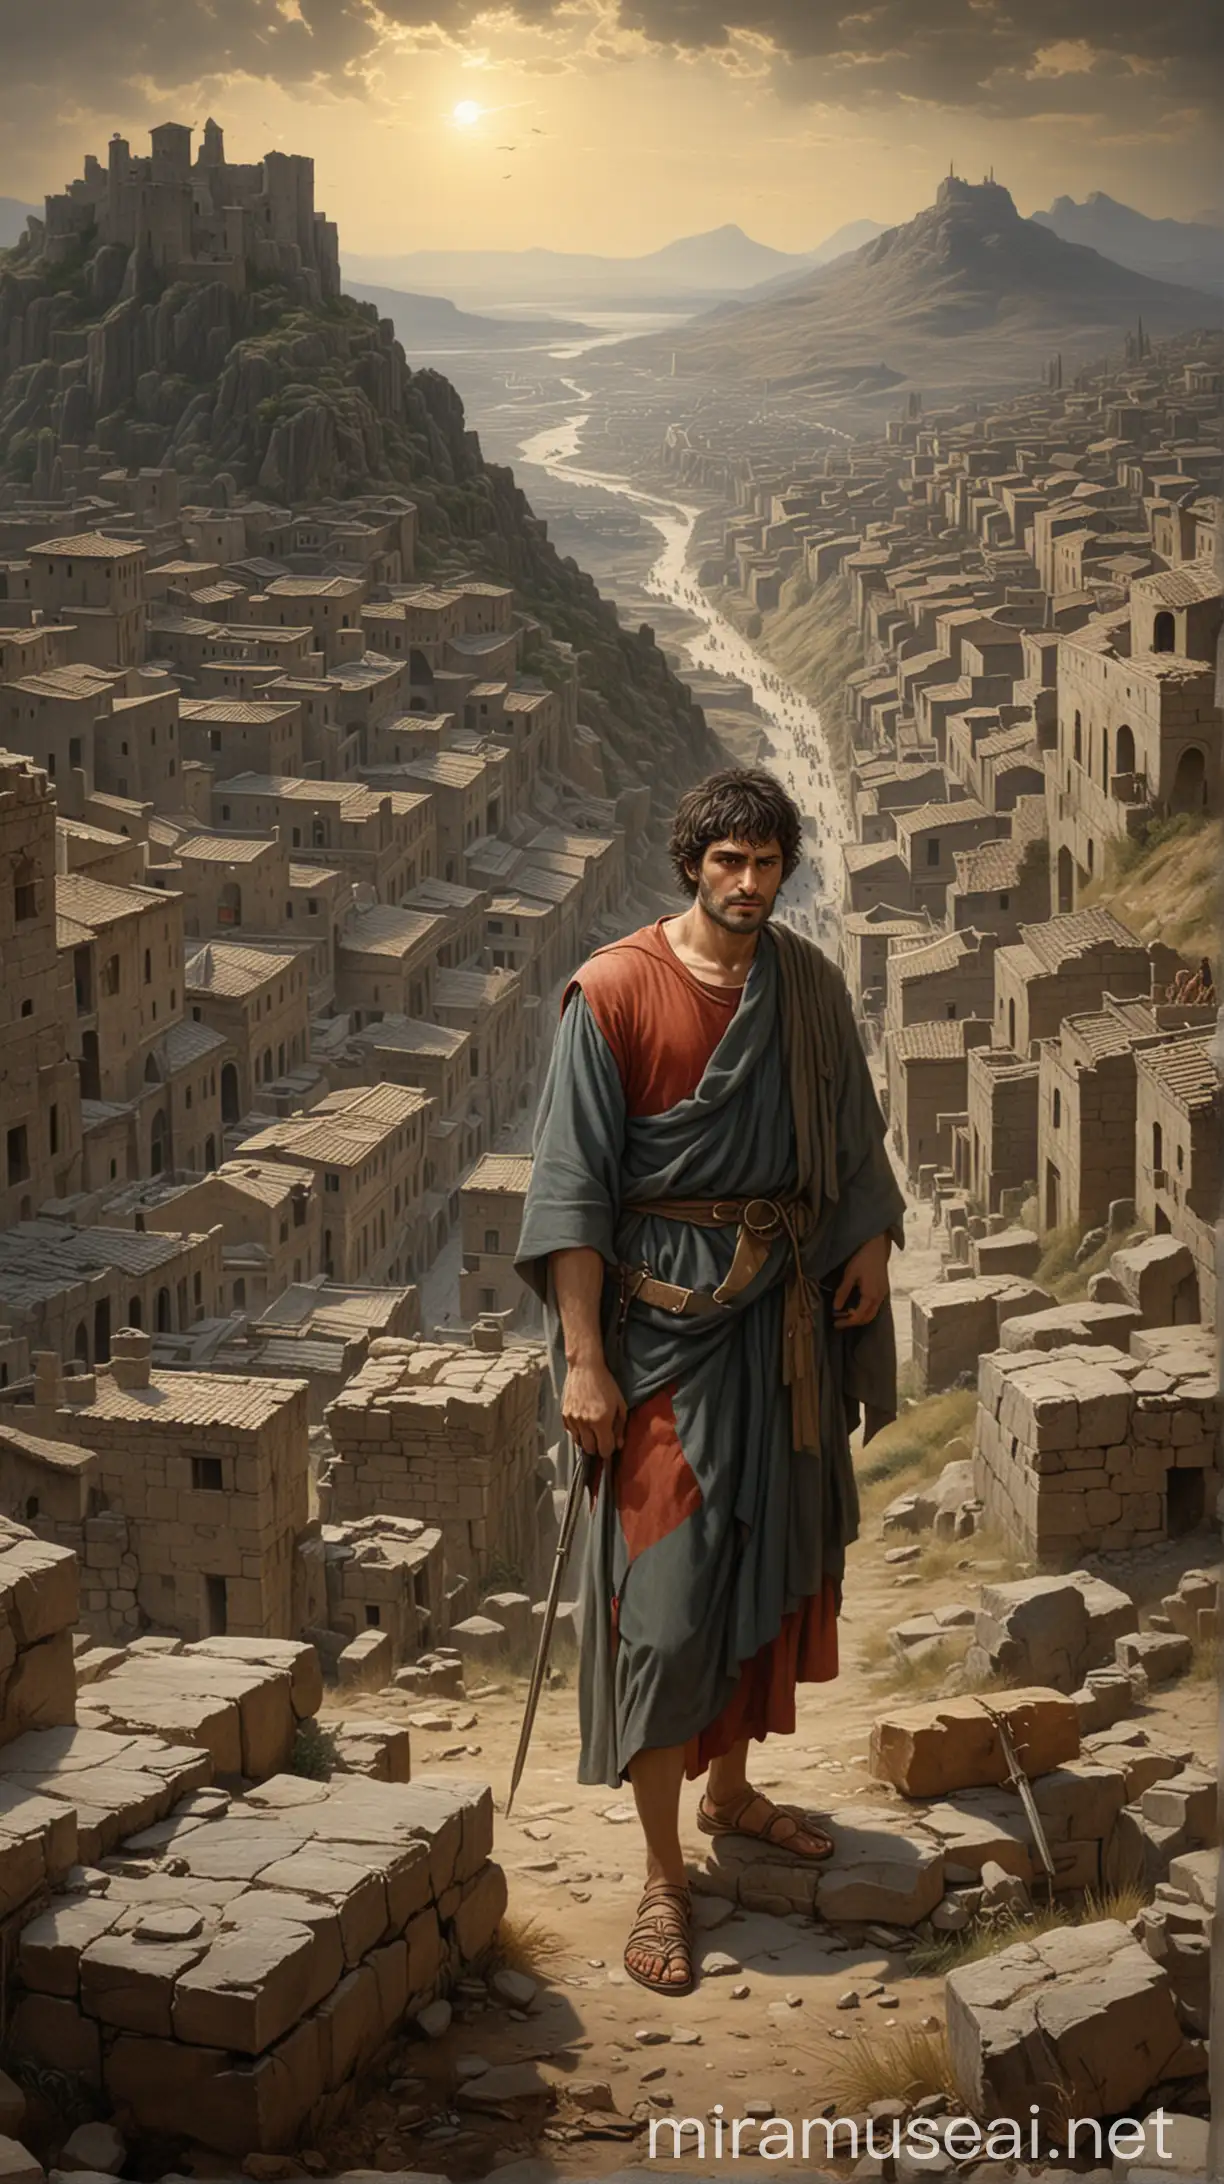 An ancient cityscape of Pergamos in the first century AD, with a somber scene depicting a Christian martyr, symbolizing Antipas."In ancient world 